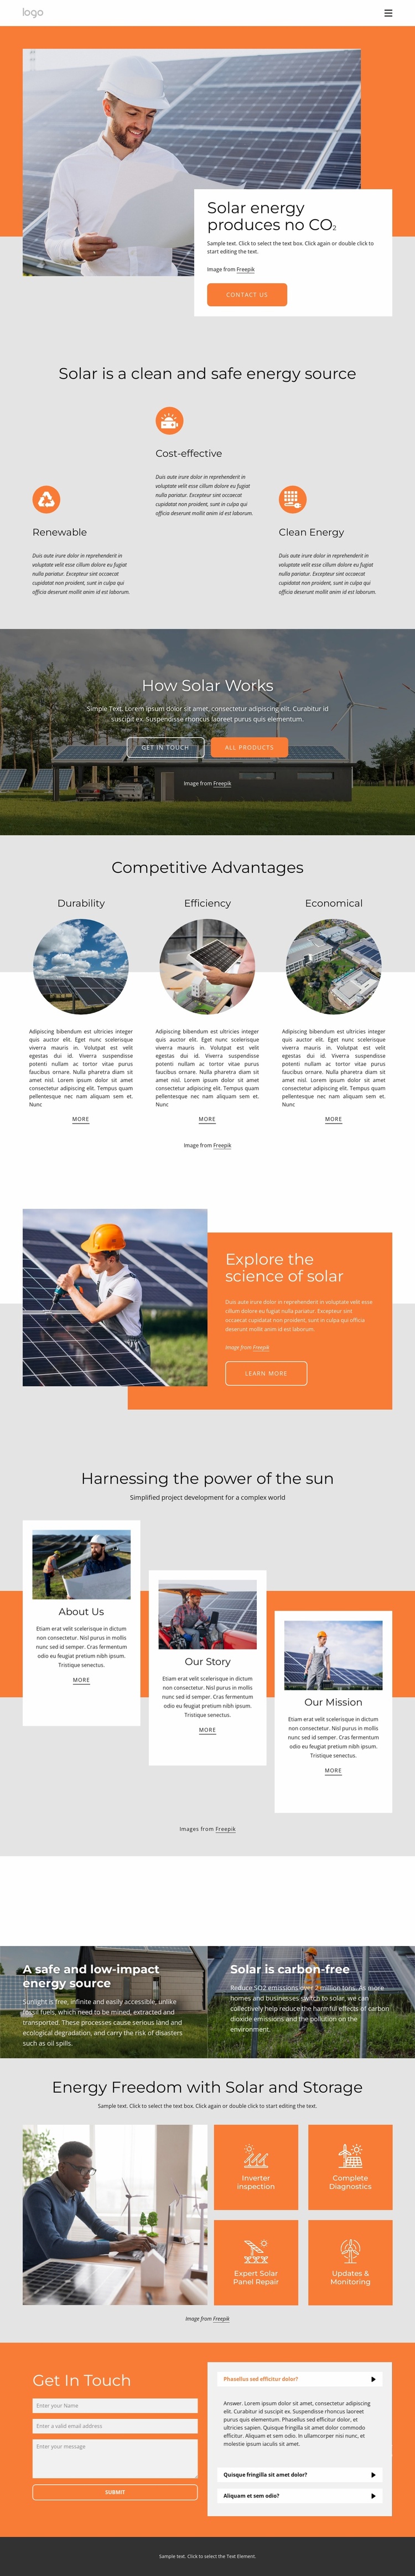 Power your home with clean solar energy eCommerce Website Design